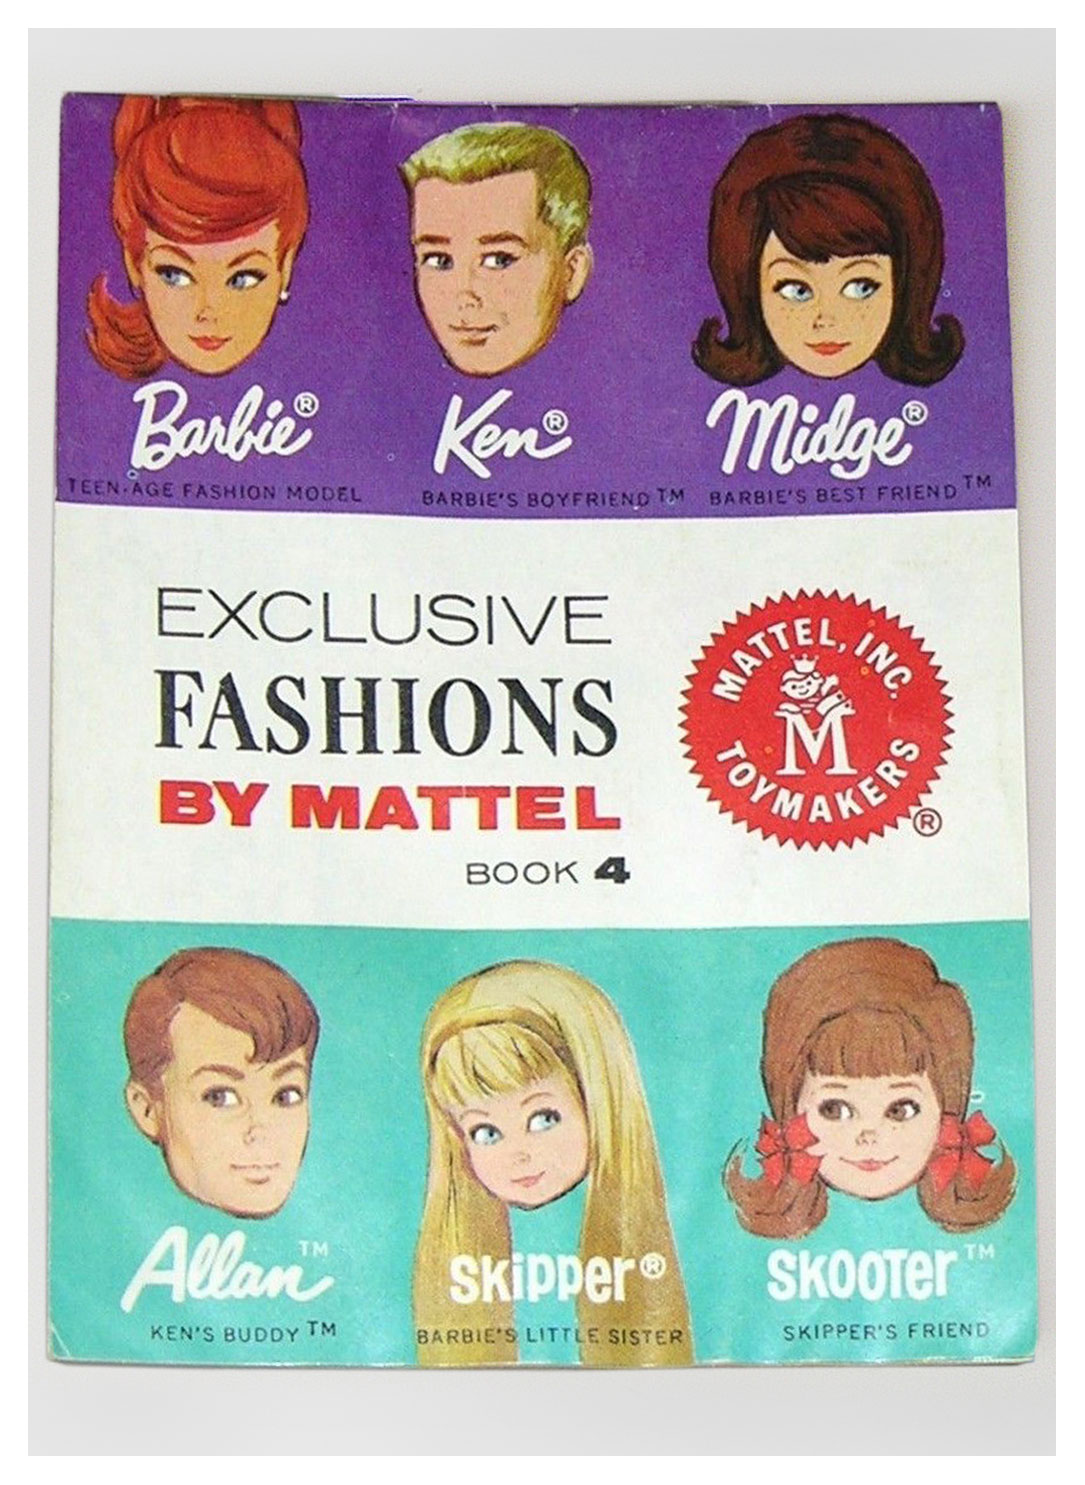 1965 Exclusive Fashions book 4